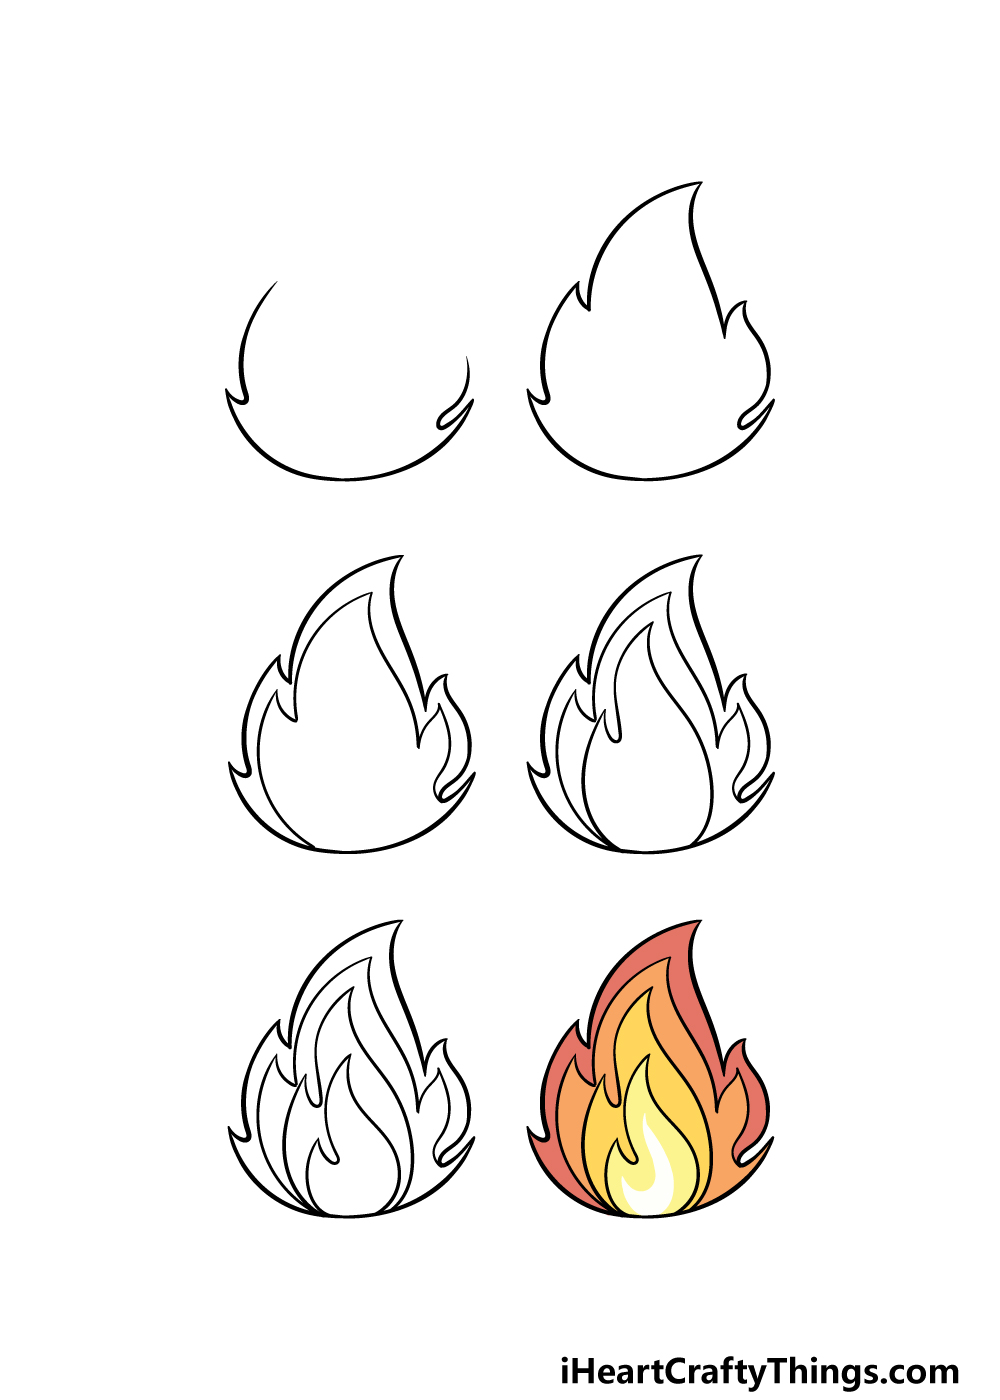 how to draw a cartoon flame in 6 steps